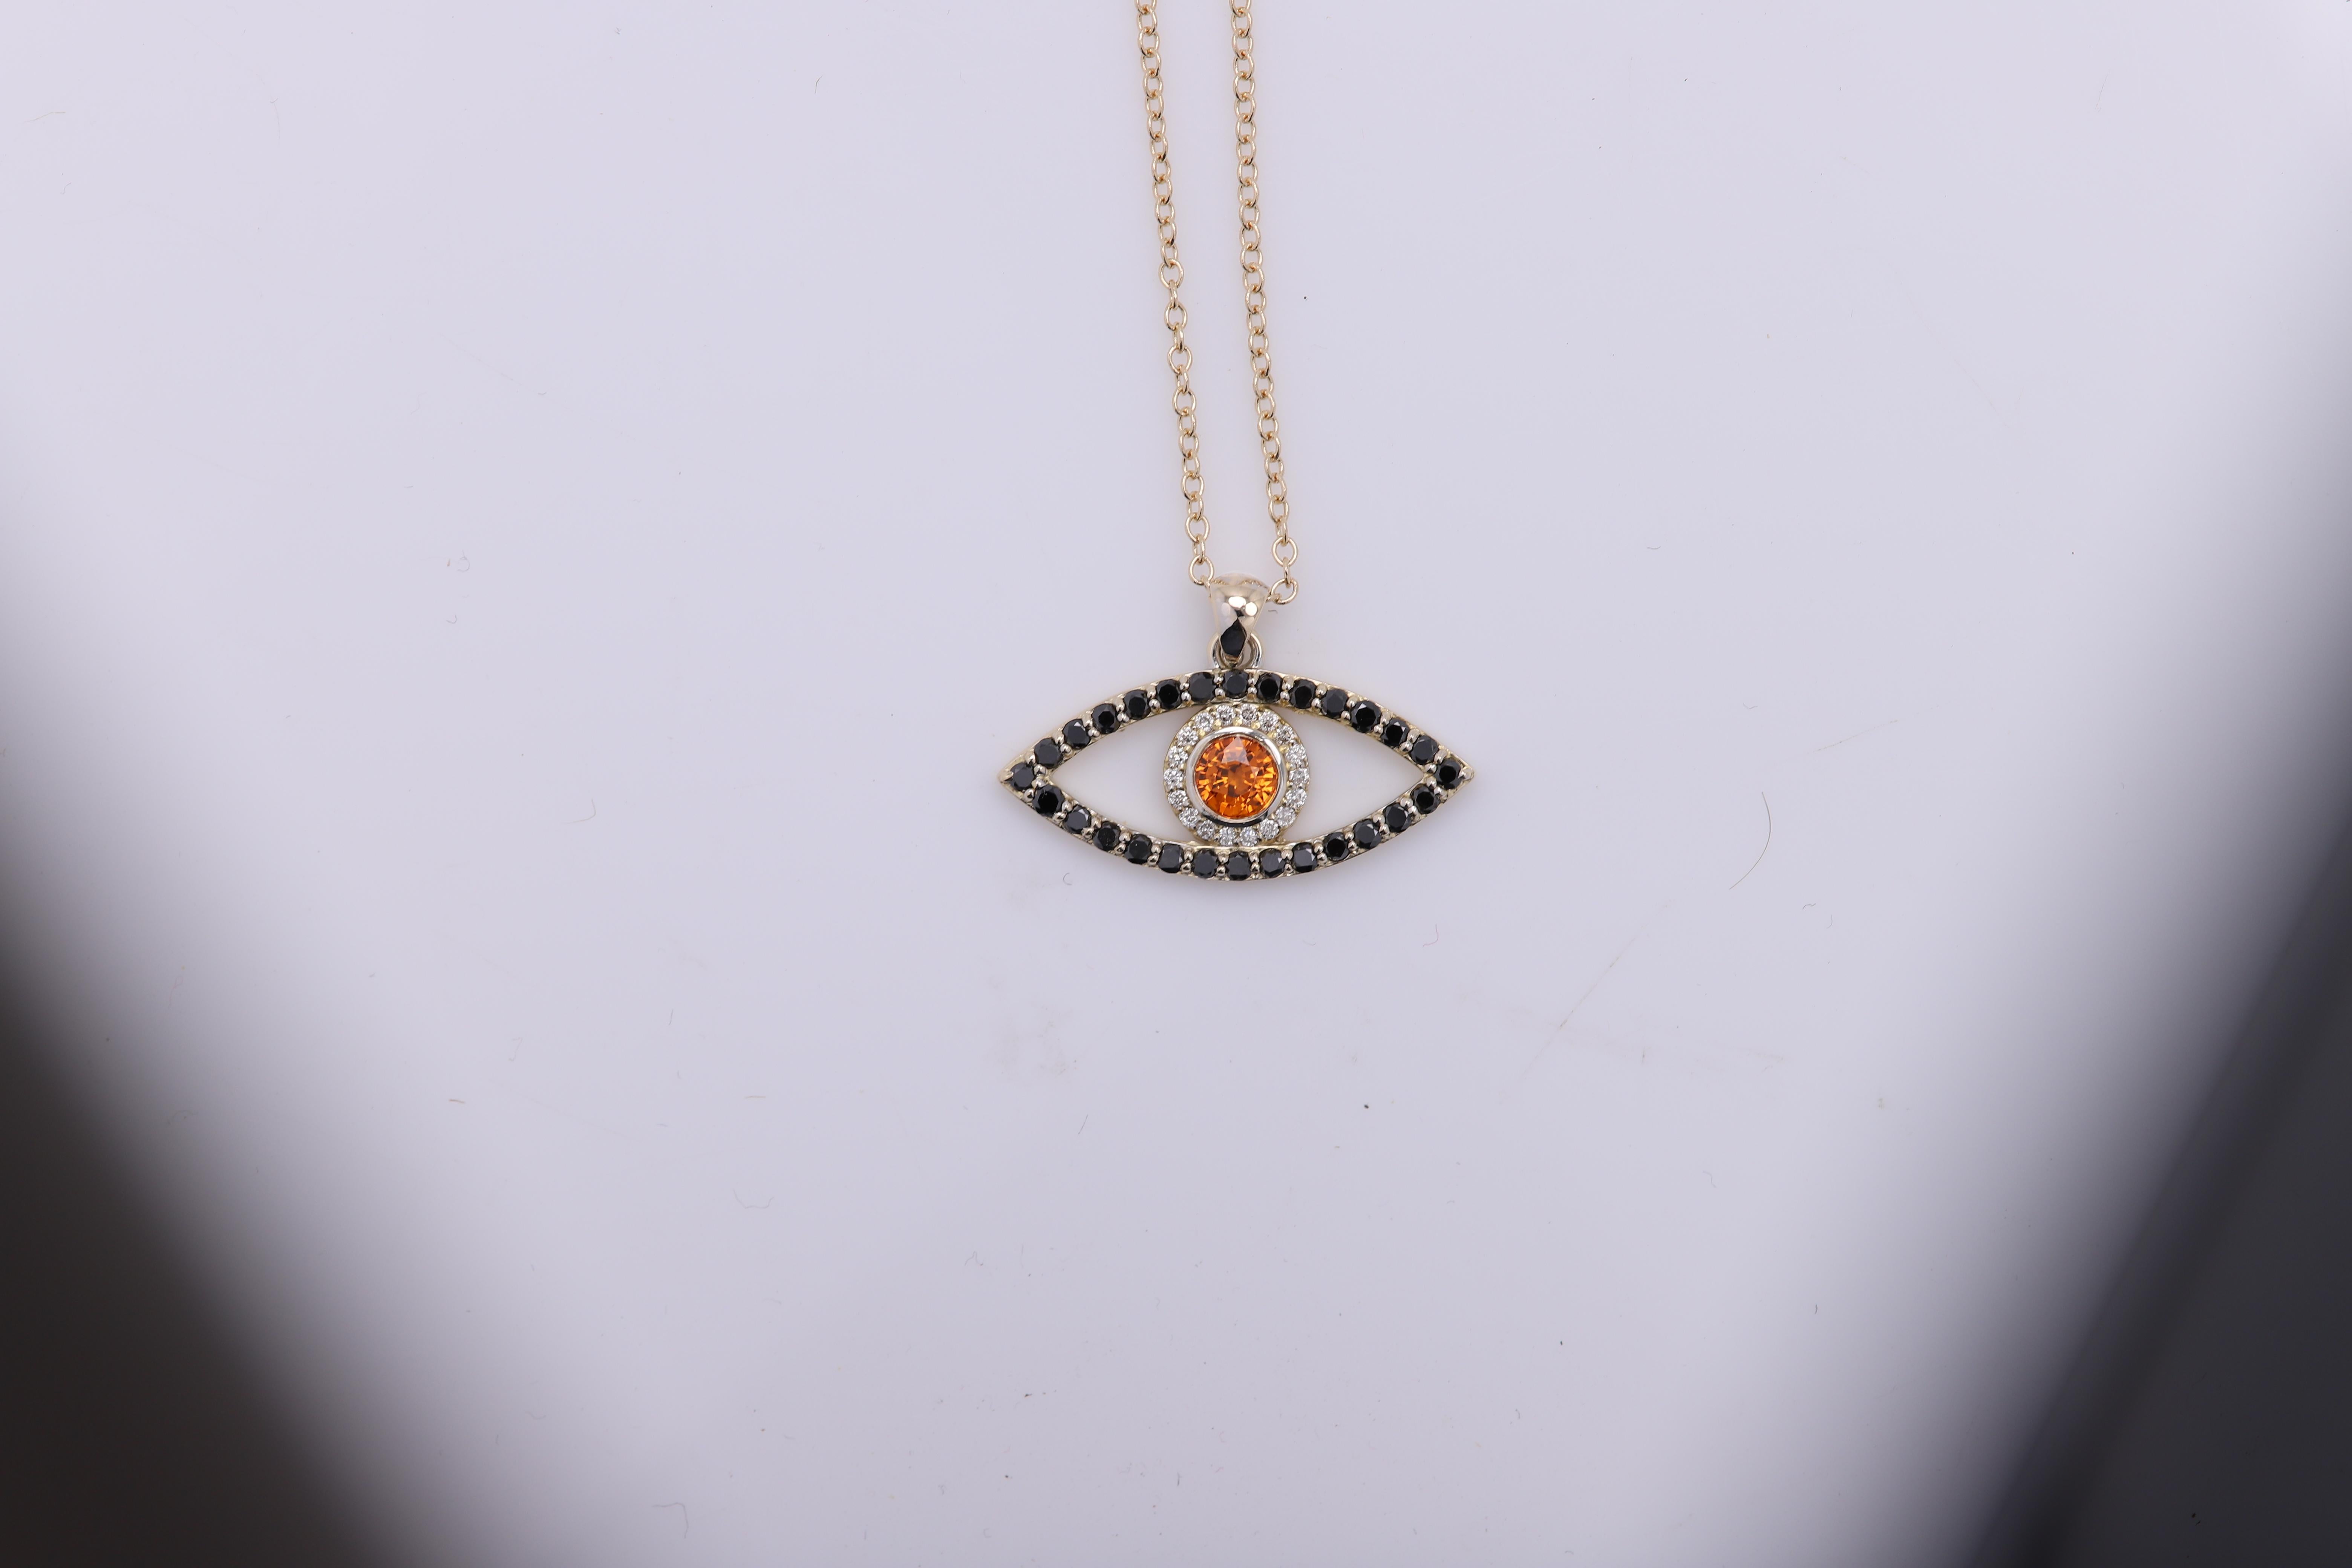 Brilliant made in USA Evil Eye pendant 
14k Yellow Gold 2.40 grams (weight without the chain)
Small Diamonds approx 0.10 ct
Black Diamonds Approx 0.30 ct
Center stone - Brilliant Orange Sapphire approx 0.50 carat
ALL STONES ARE NATURAL !
eye size 1'